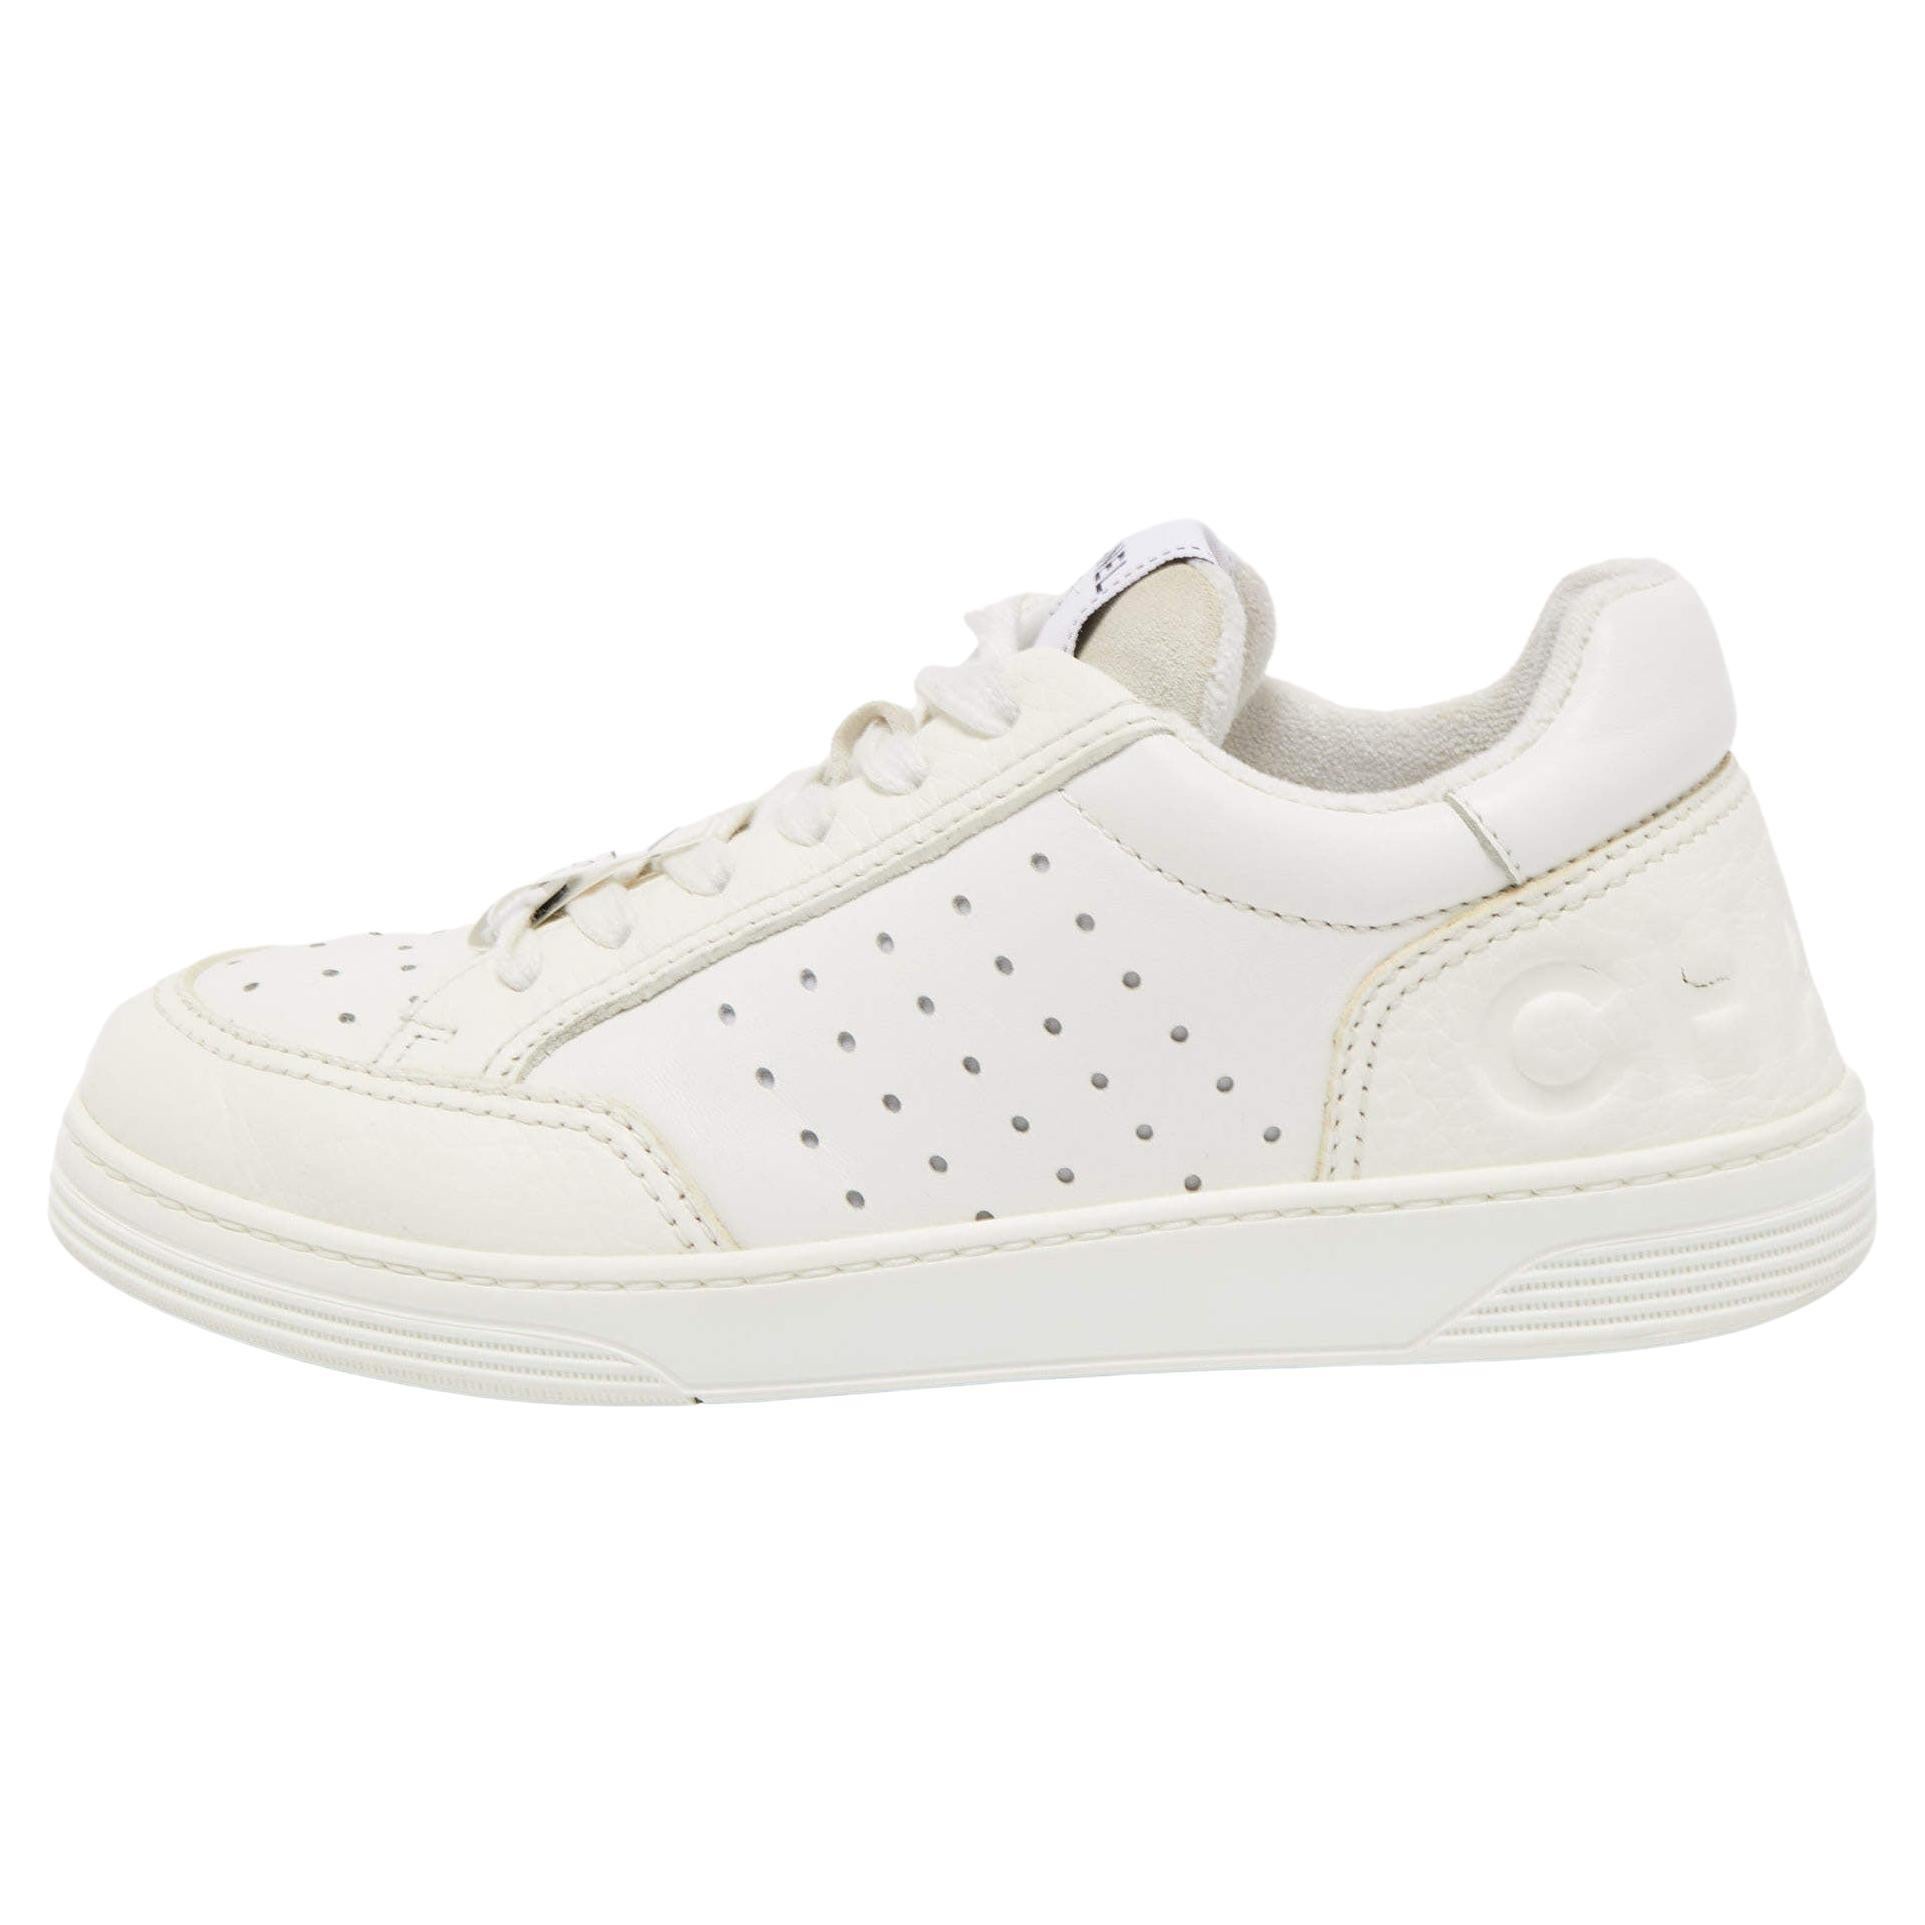 white chanel sneakers womens 7